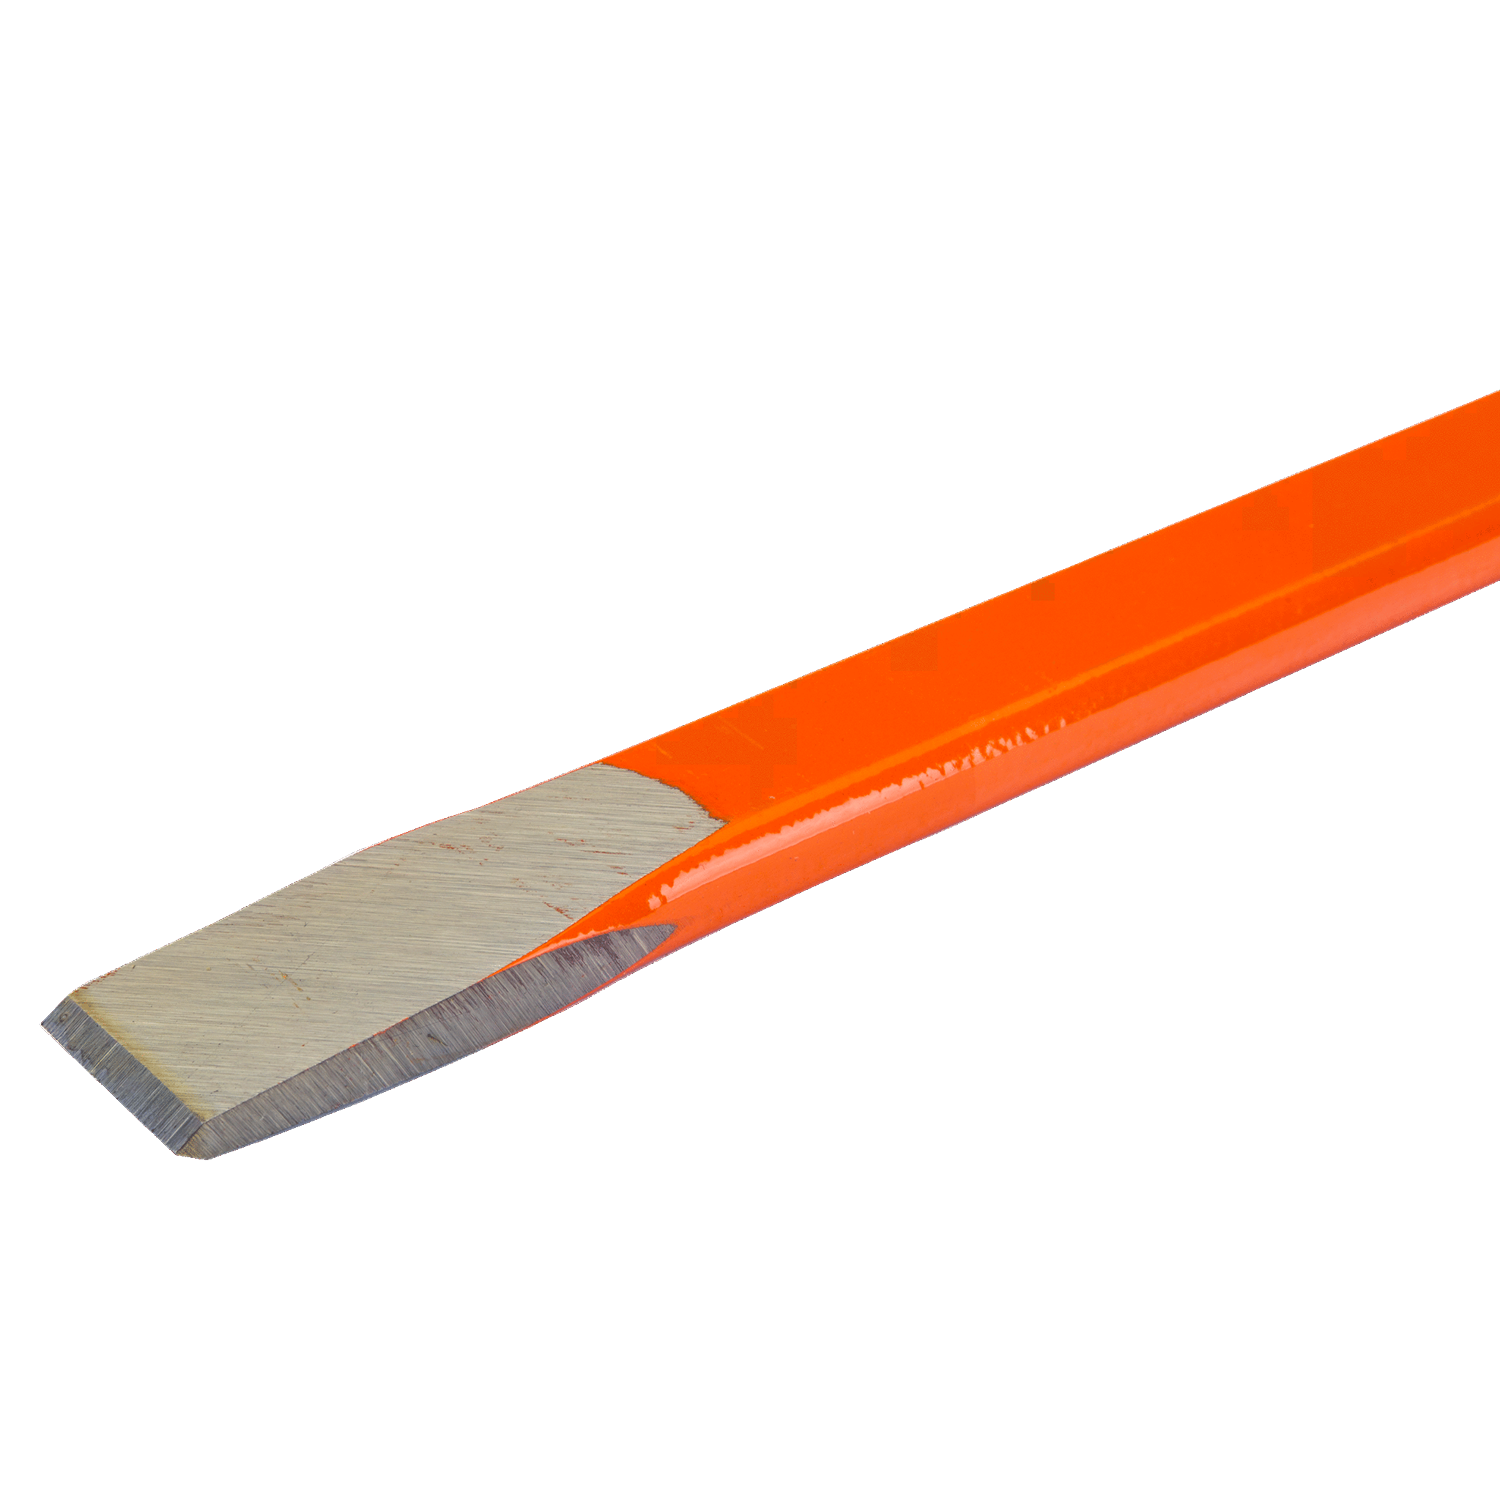 BAHCO 8740 Mason Chisel with Long Flat Shank (BAHCO Tools) - Premium Mason Chisel from BAHCO - Shop now at Yew Aik.